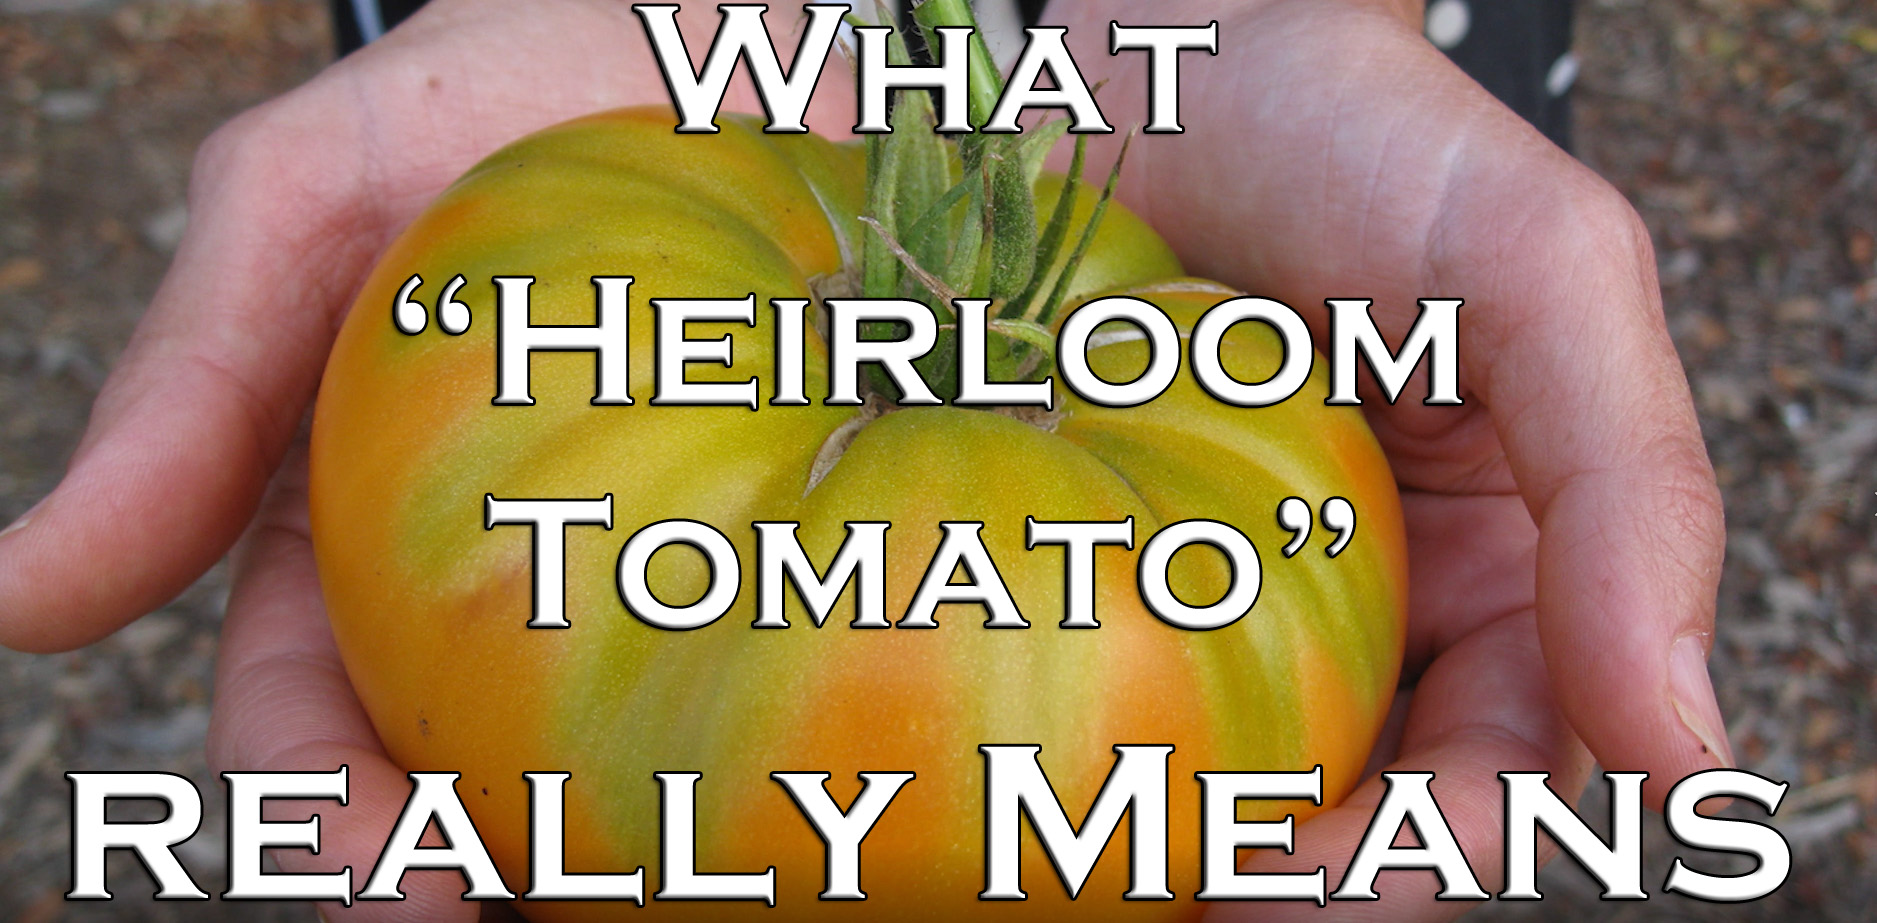 You are currently viewing YouTube: What “Heirloom Tomato” Really Means